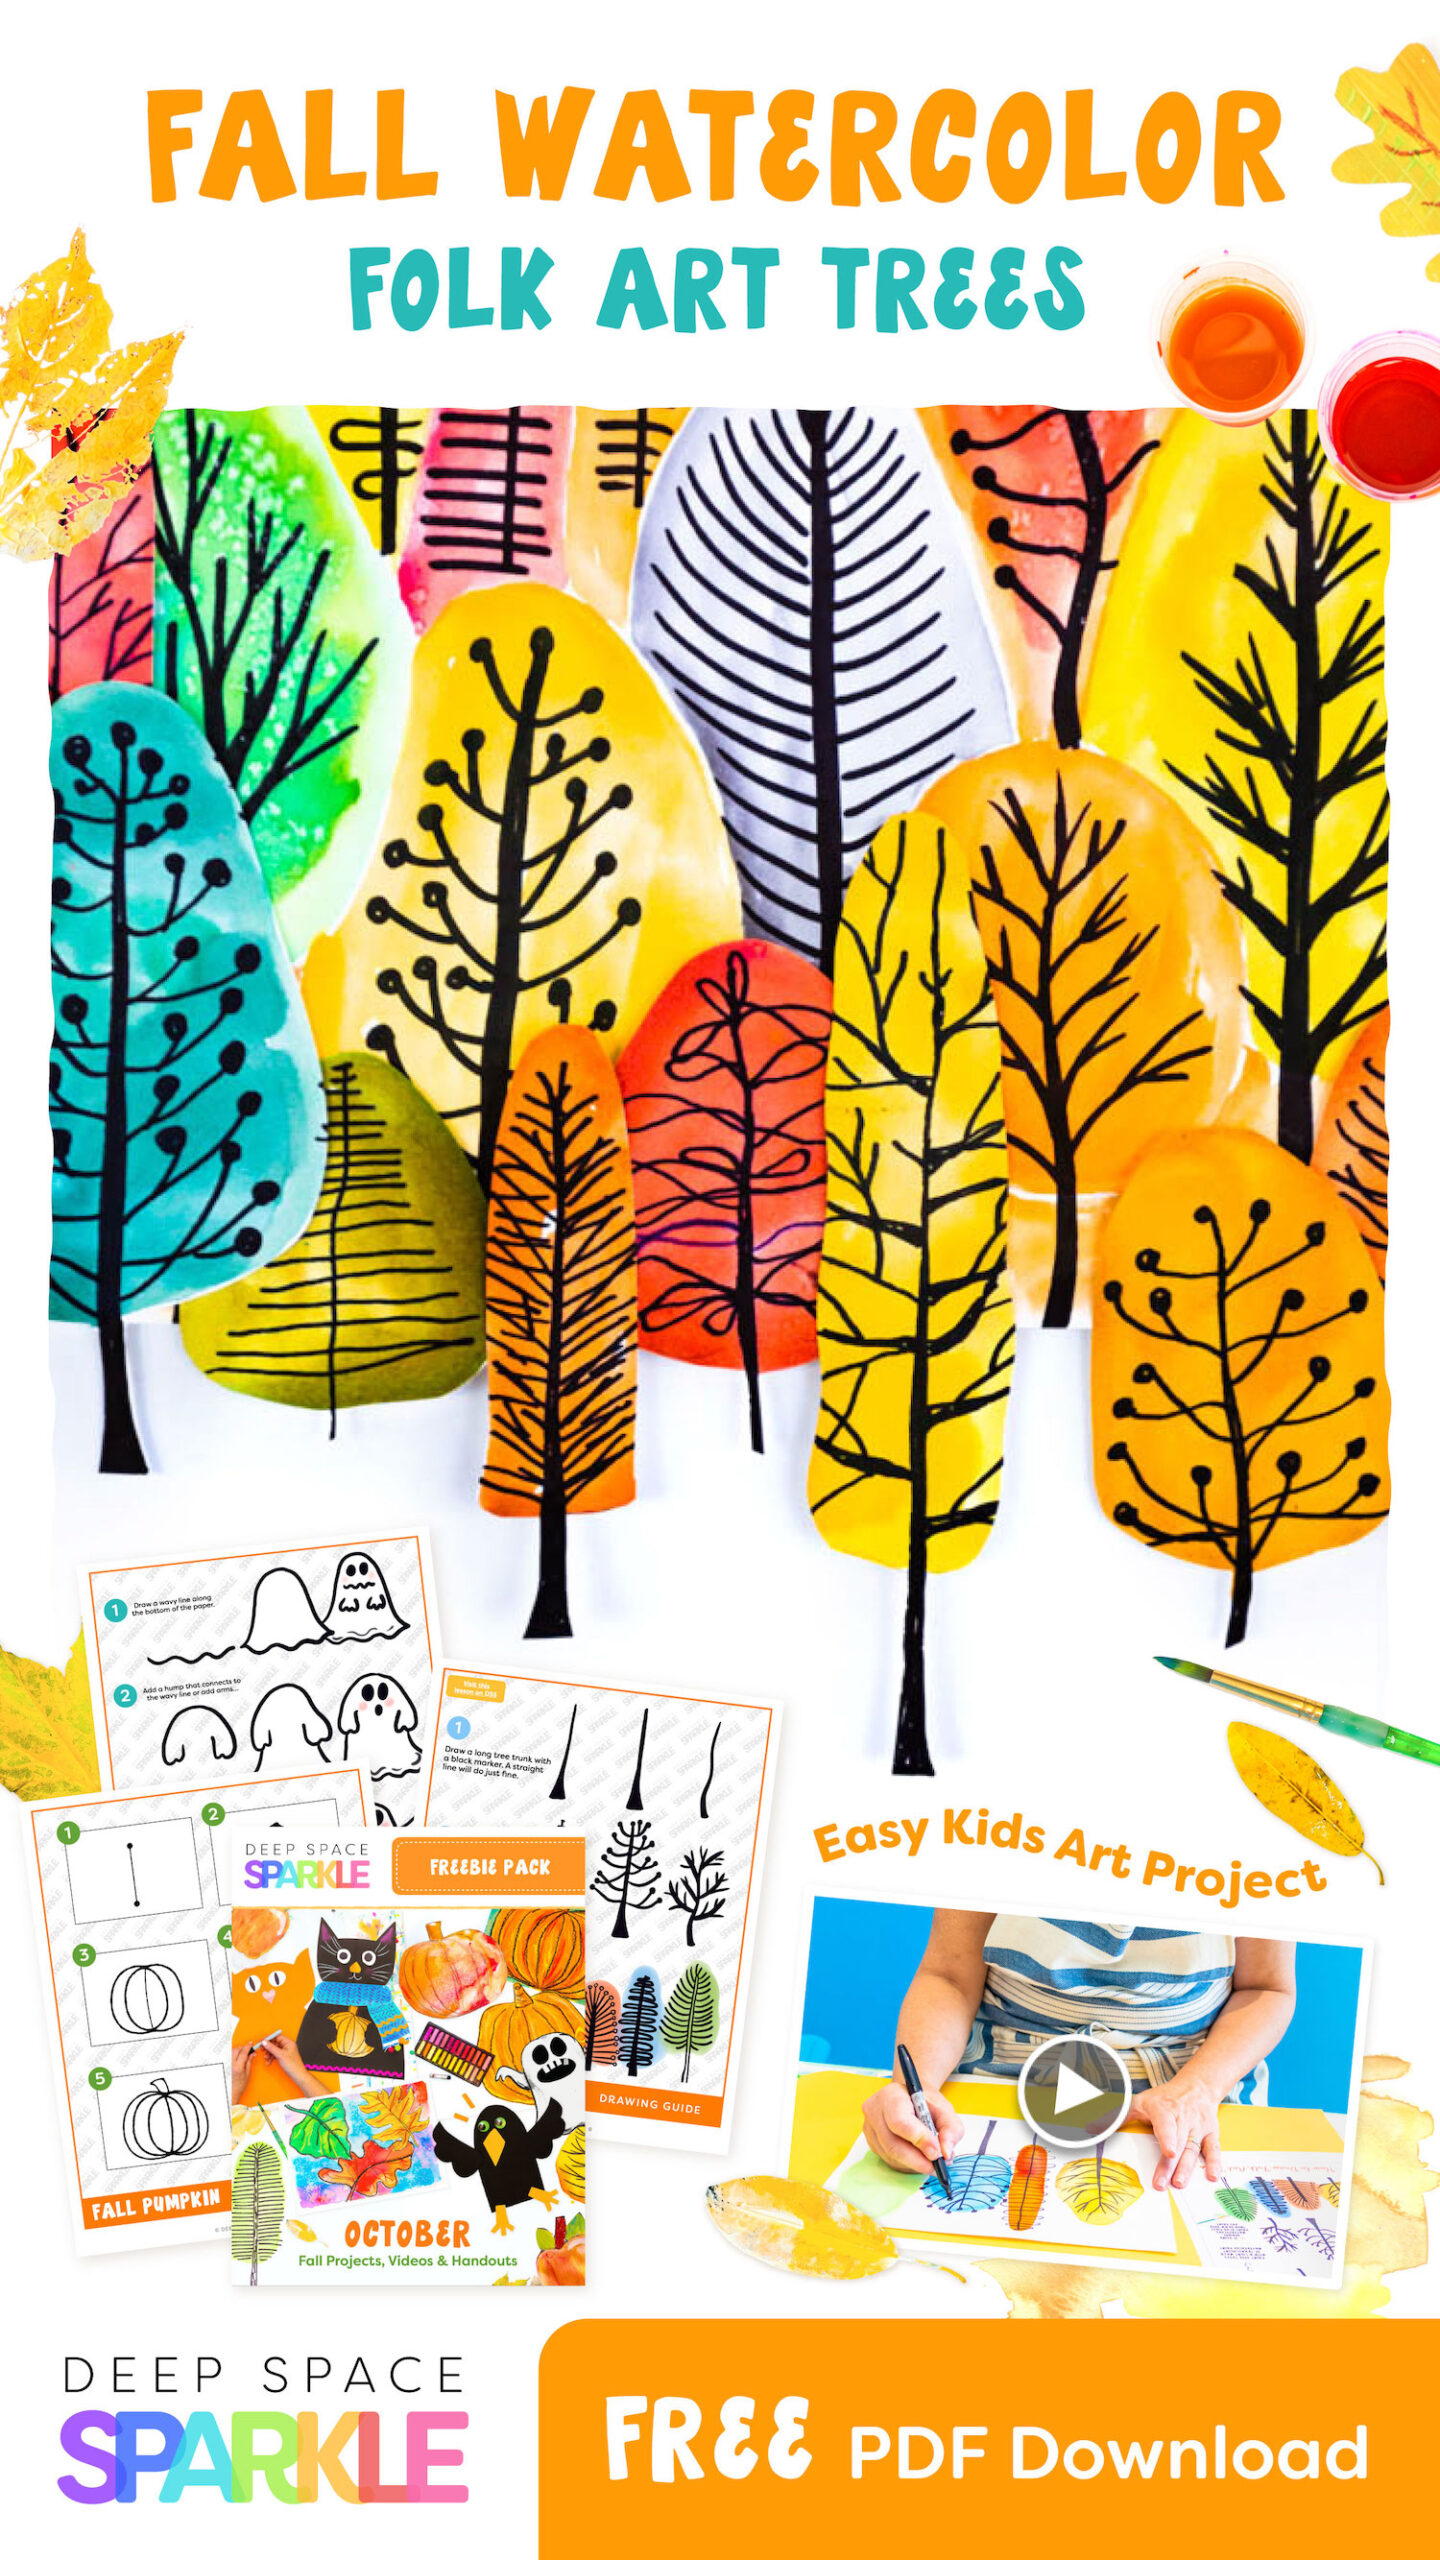 How to Draw and Paint Folk Art Trees